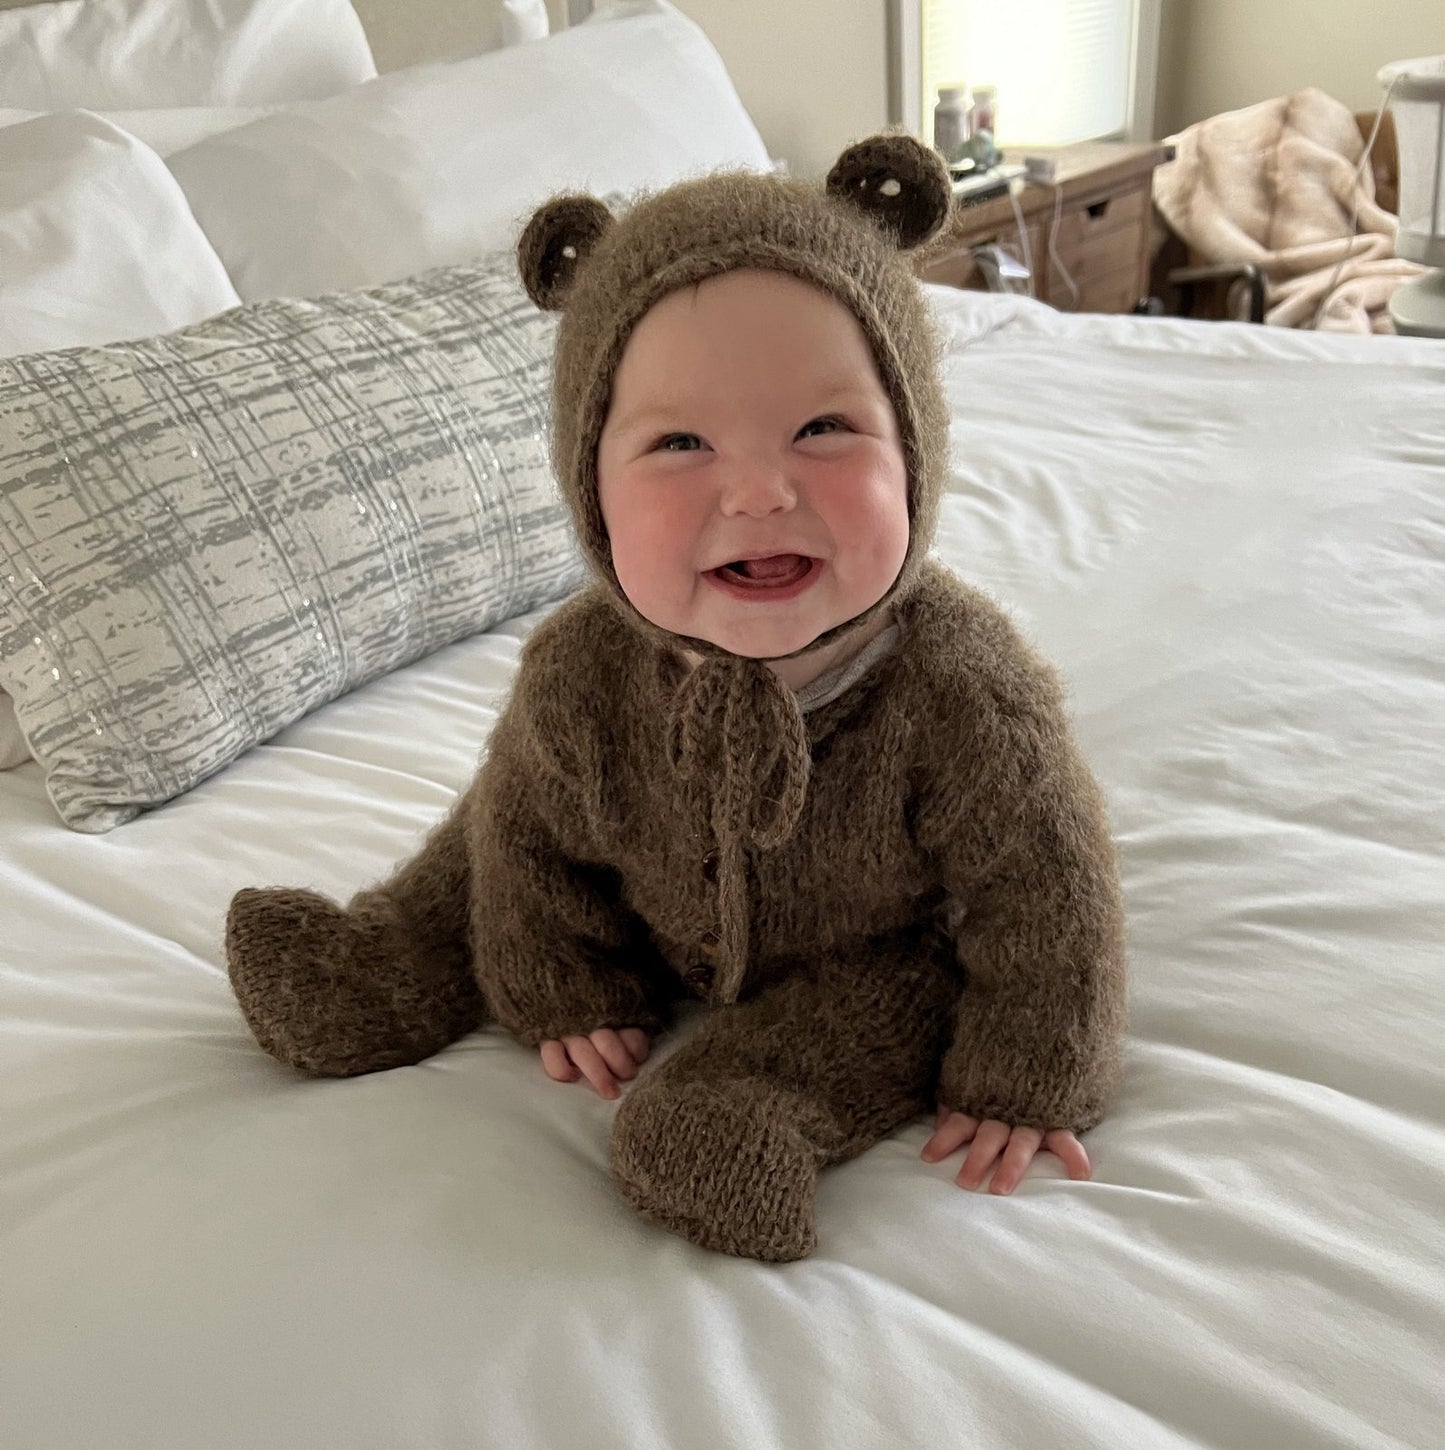 Handknit brown bear footed pajama suit for baby photo shoots